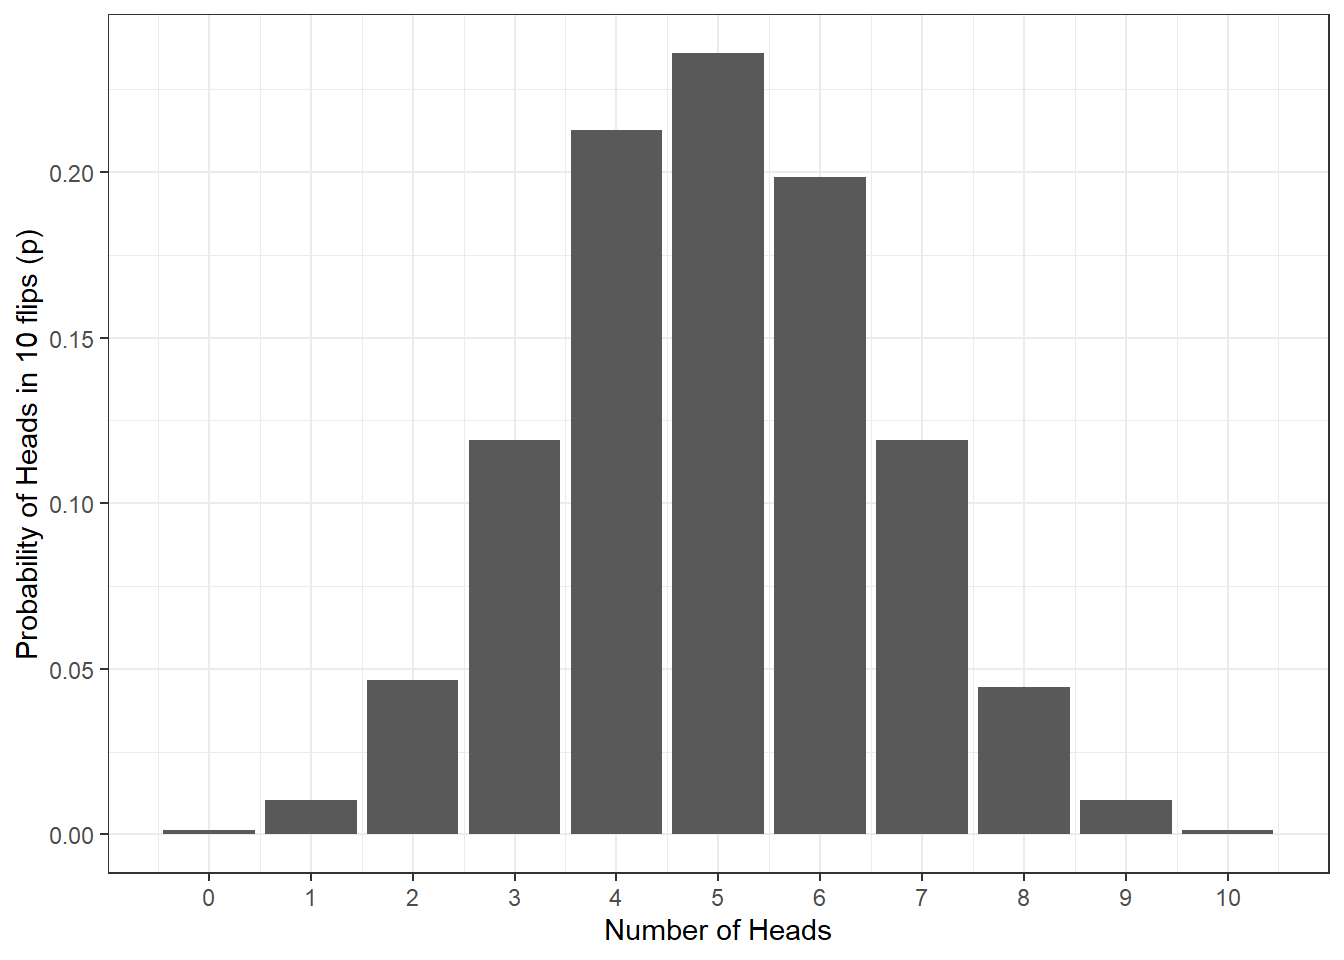 Probability of no. of heads from 10 coin tosses